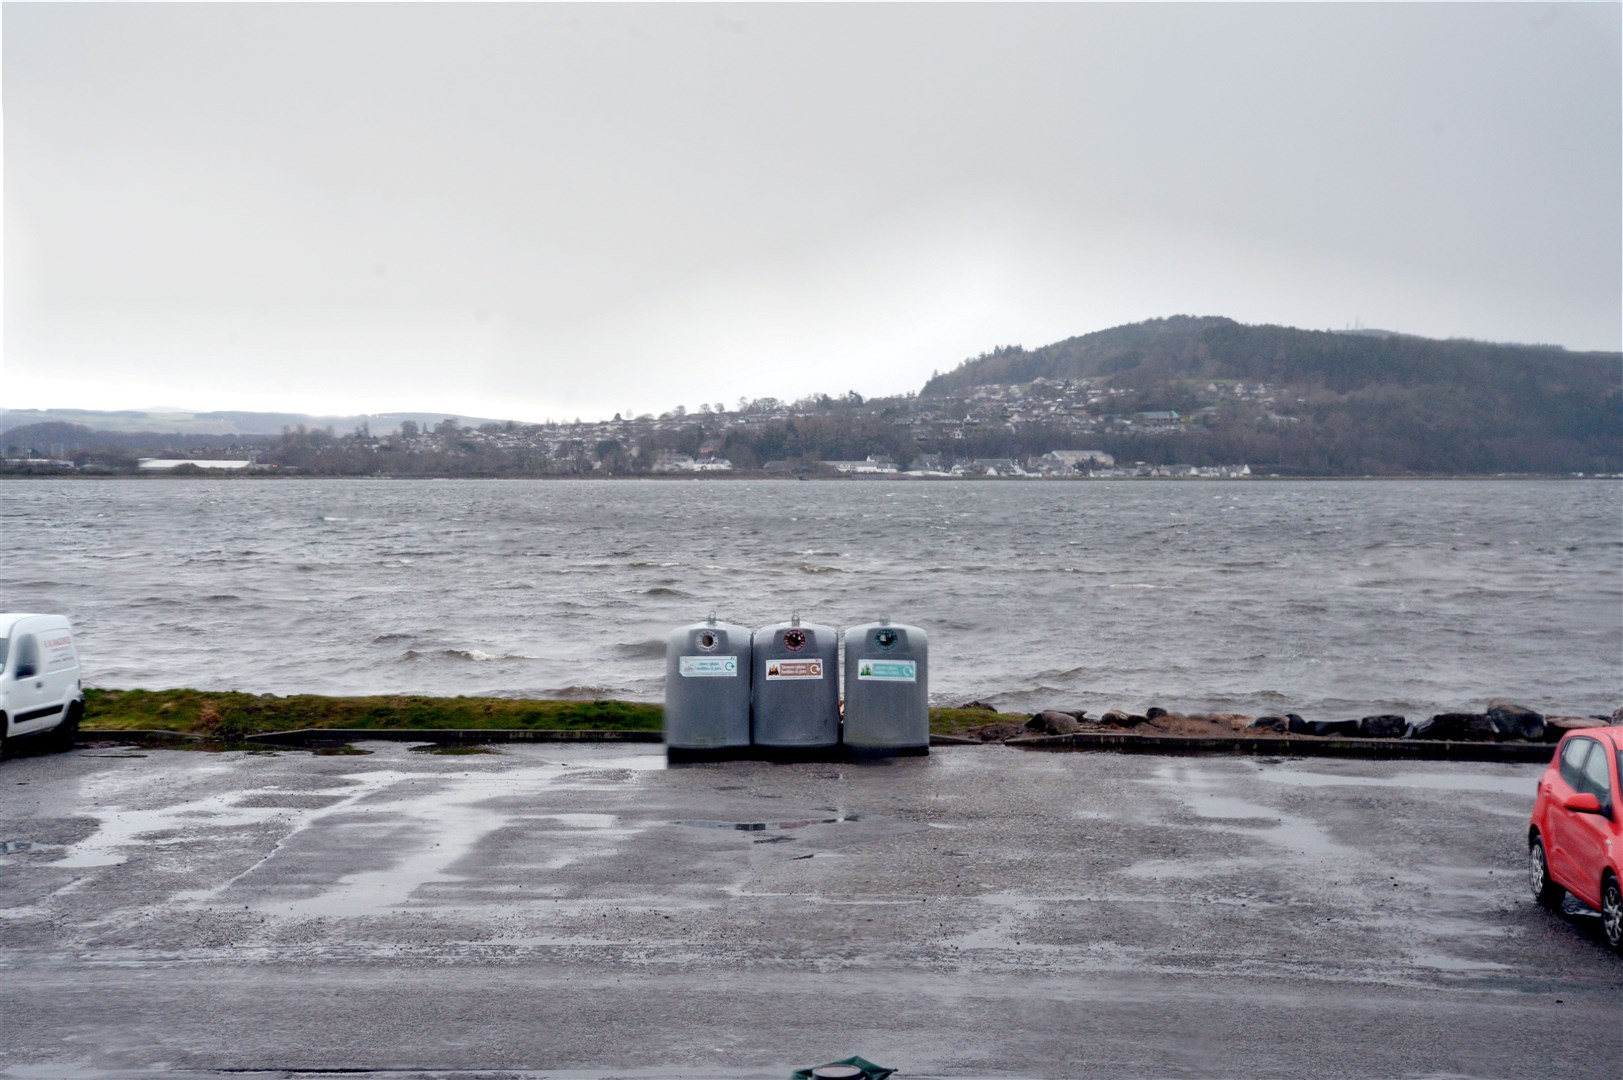 The view from the home of one resident showing the position of the prominent bottle banks in North Kessock.